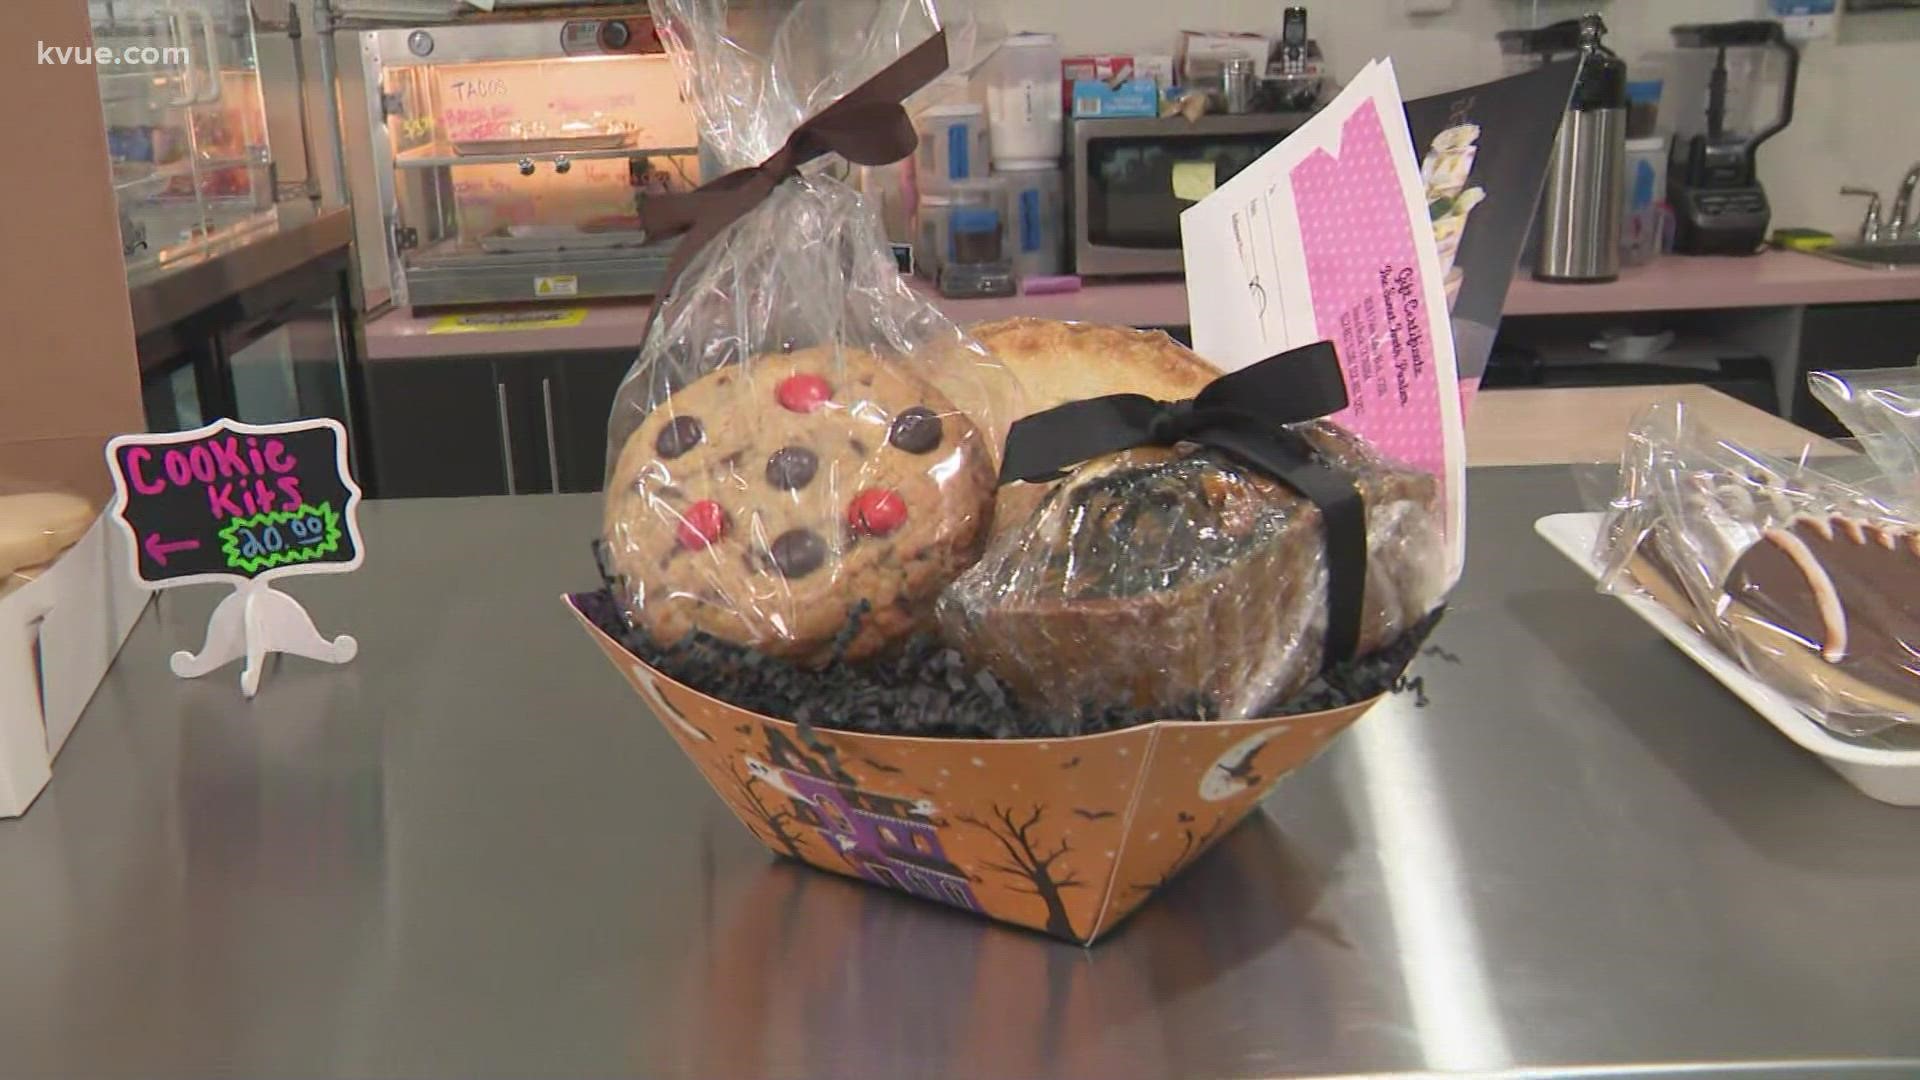 Check out the sweets at this Round Rock bakery and support local business.